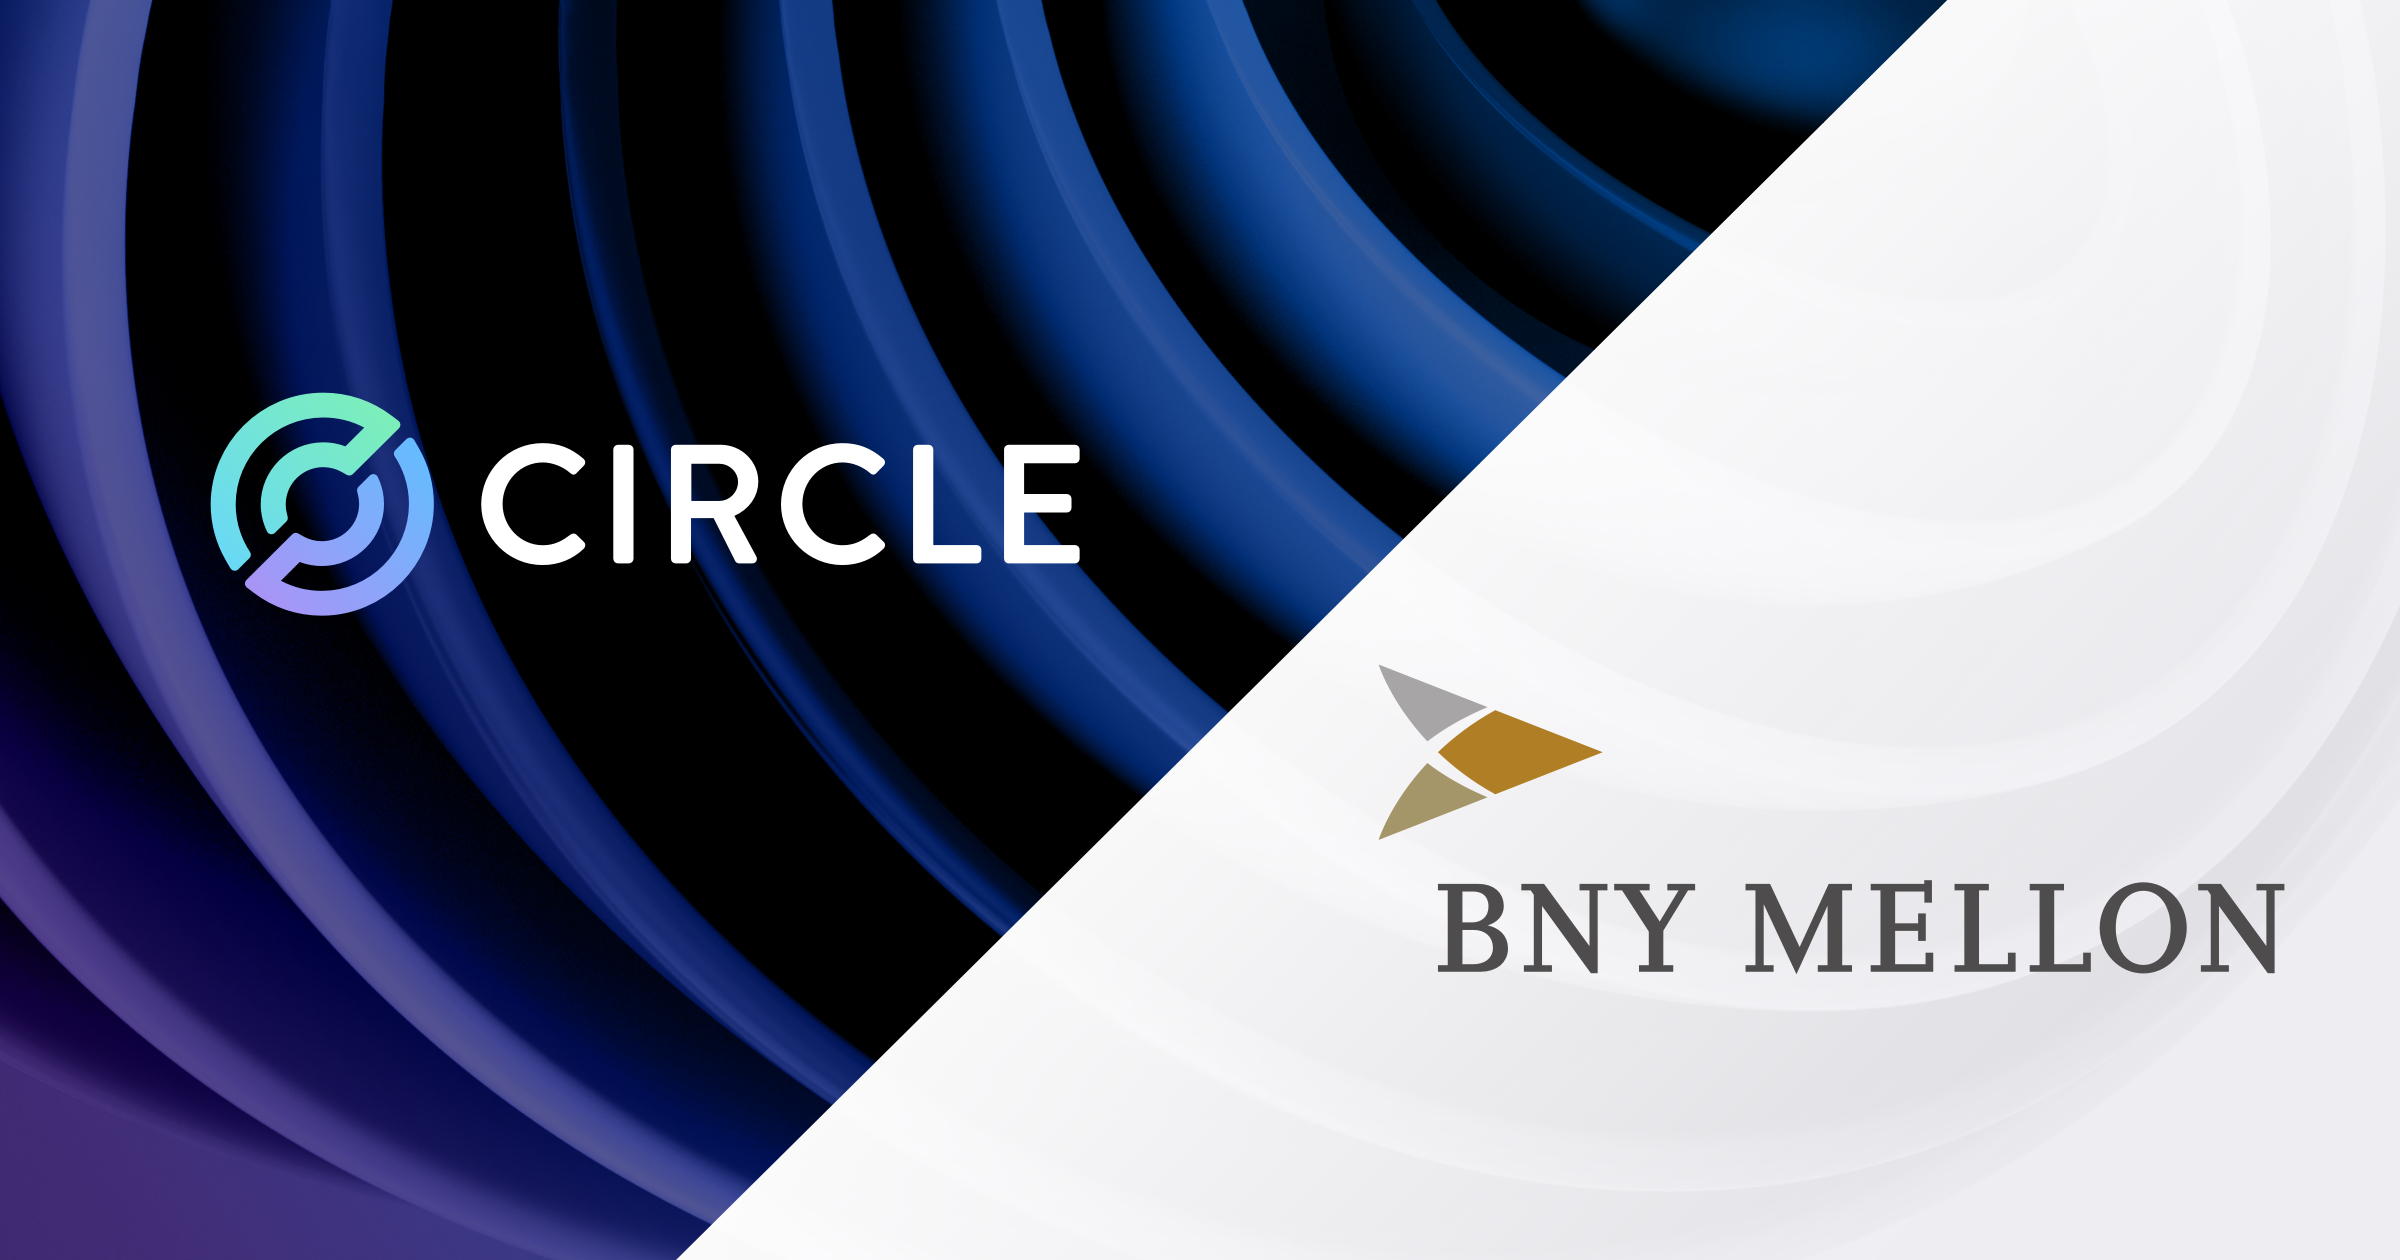 BNY Mellon Bank becomes the primary custodian of Circle's USDC Stablecoin Reserve